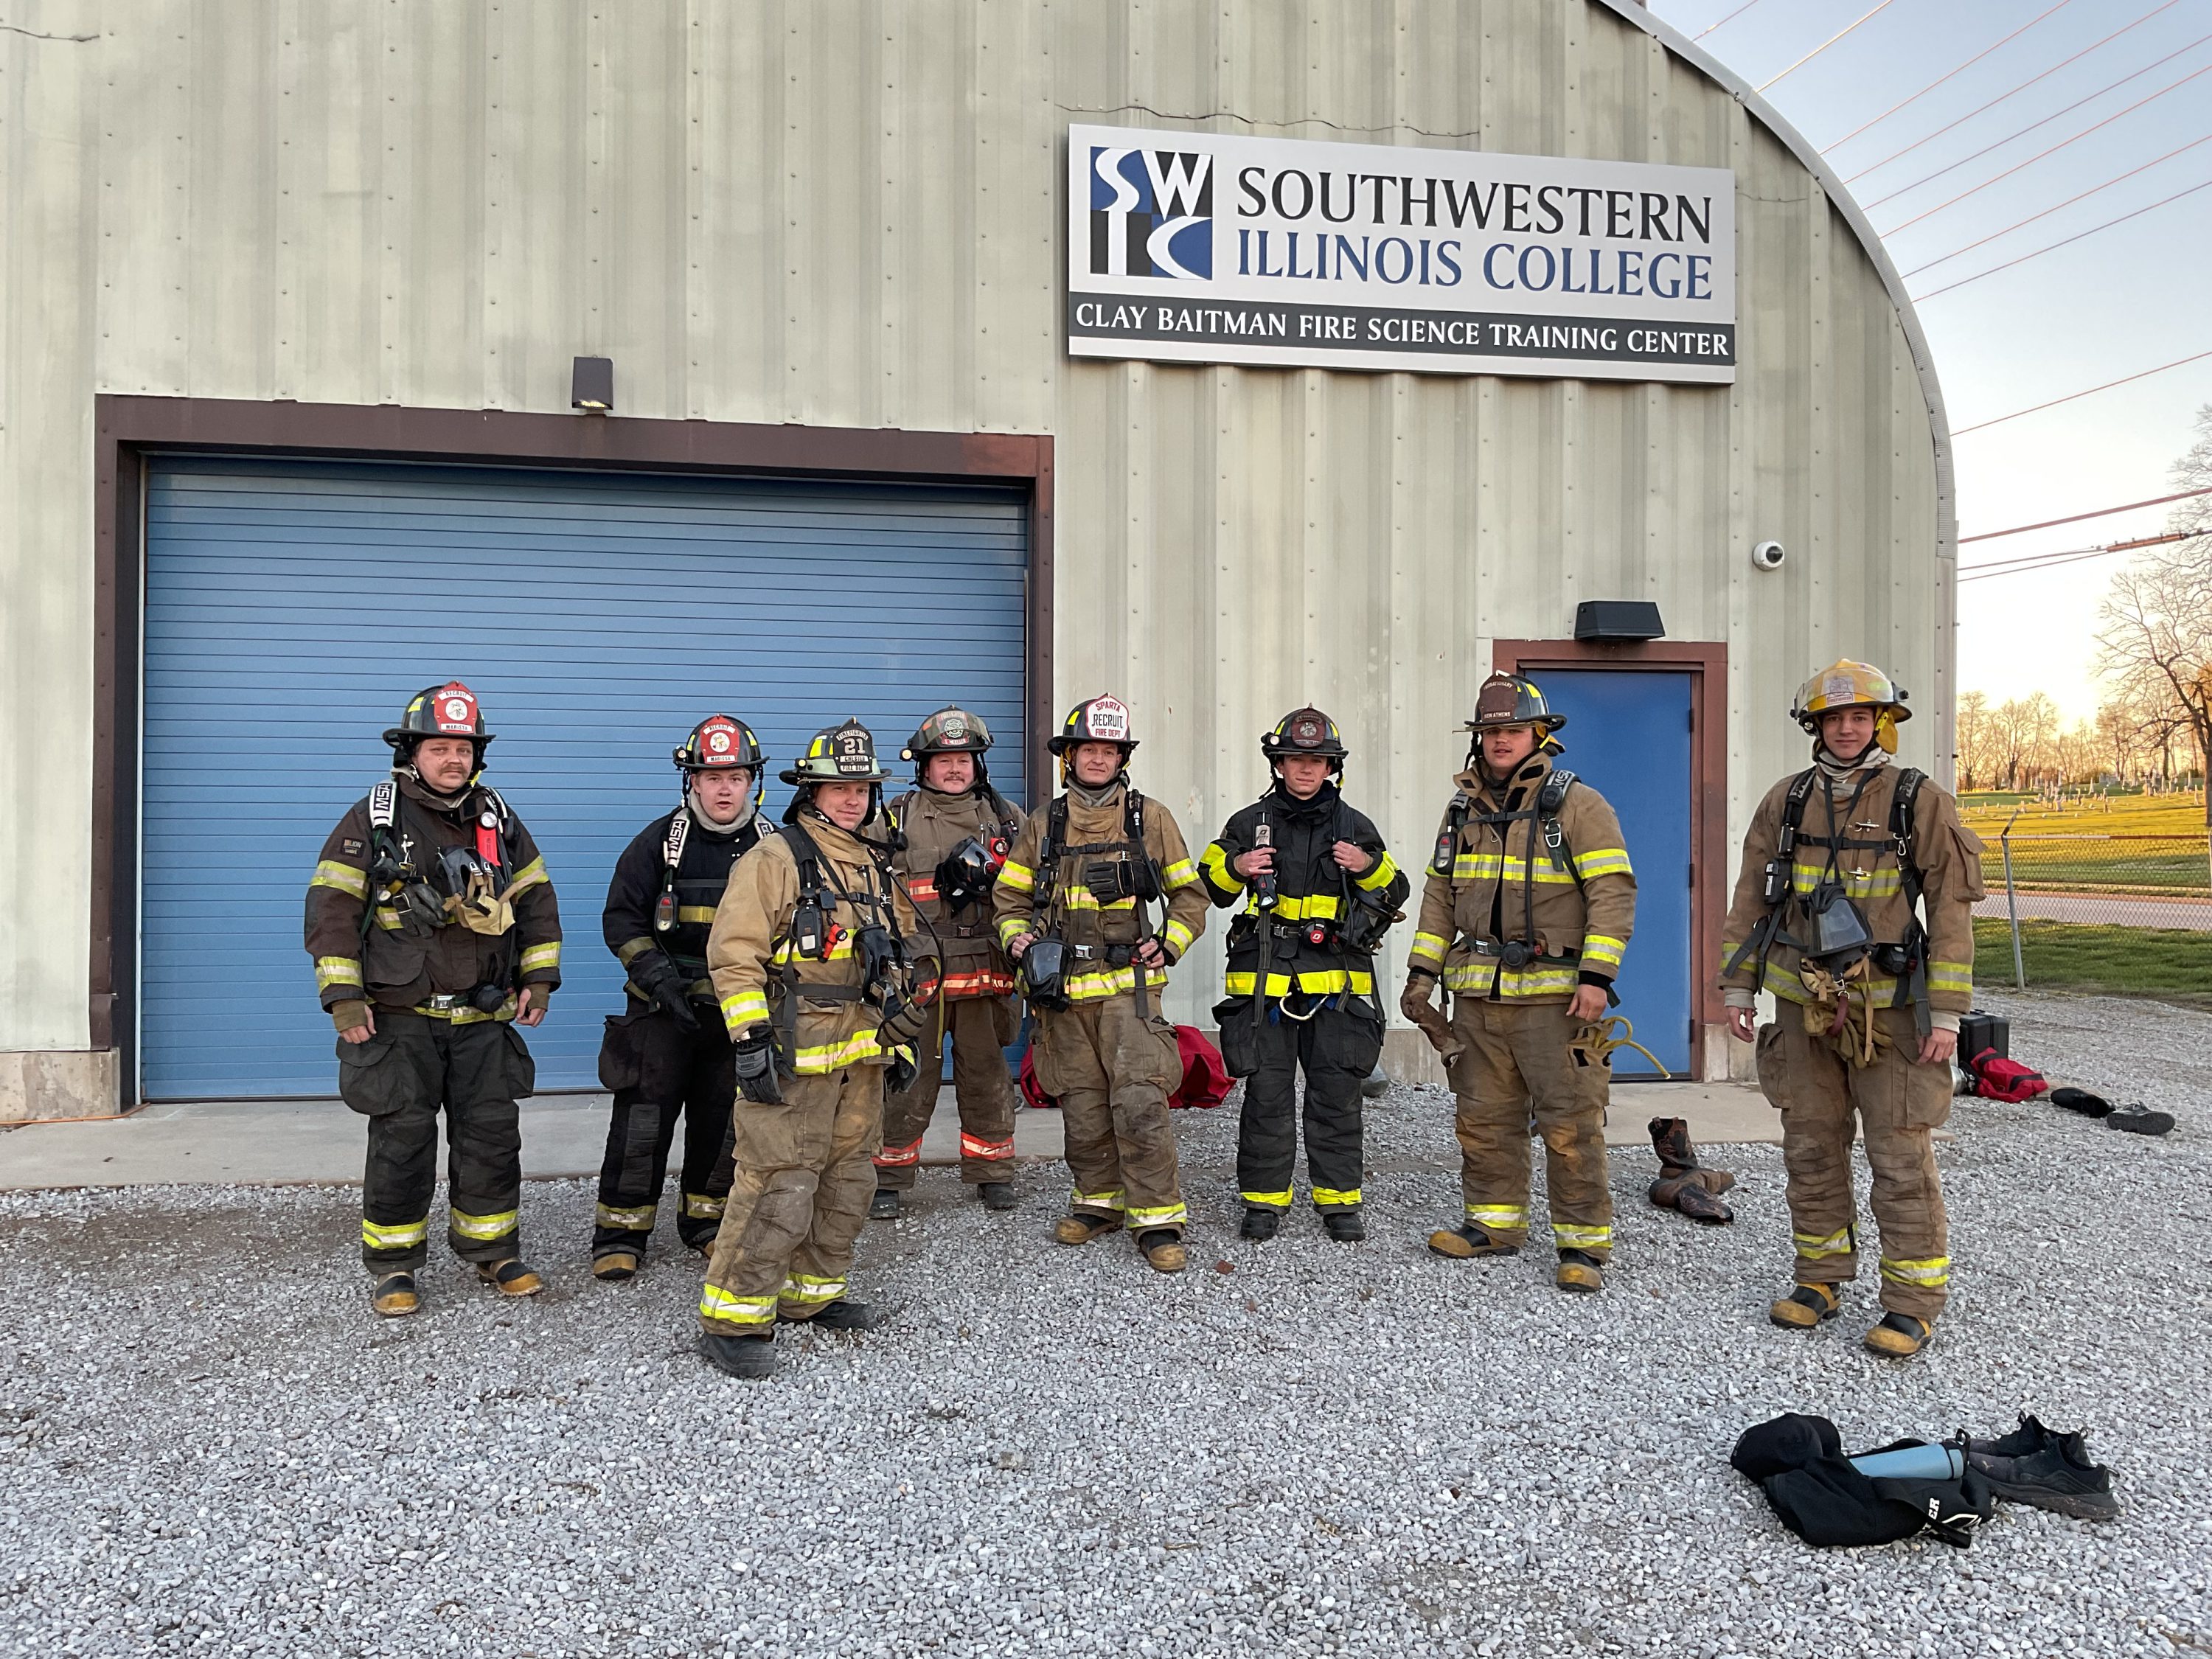 Fire Science Students outside at their Training Center